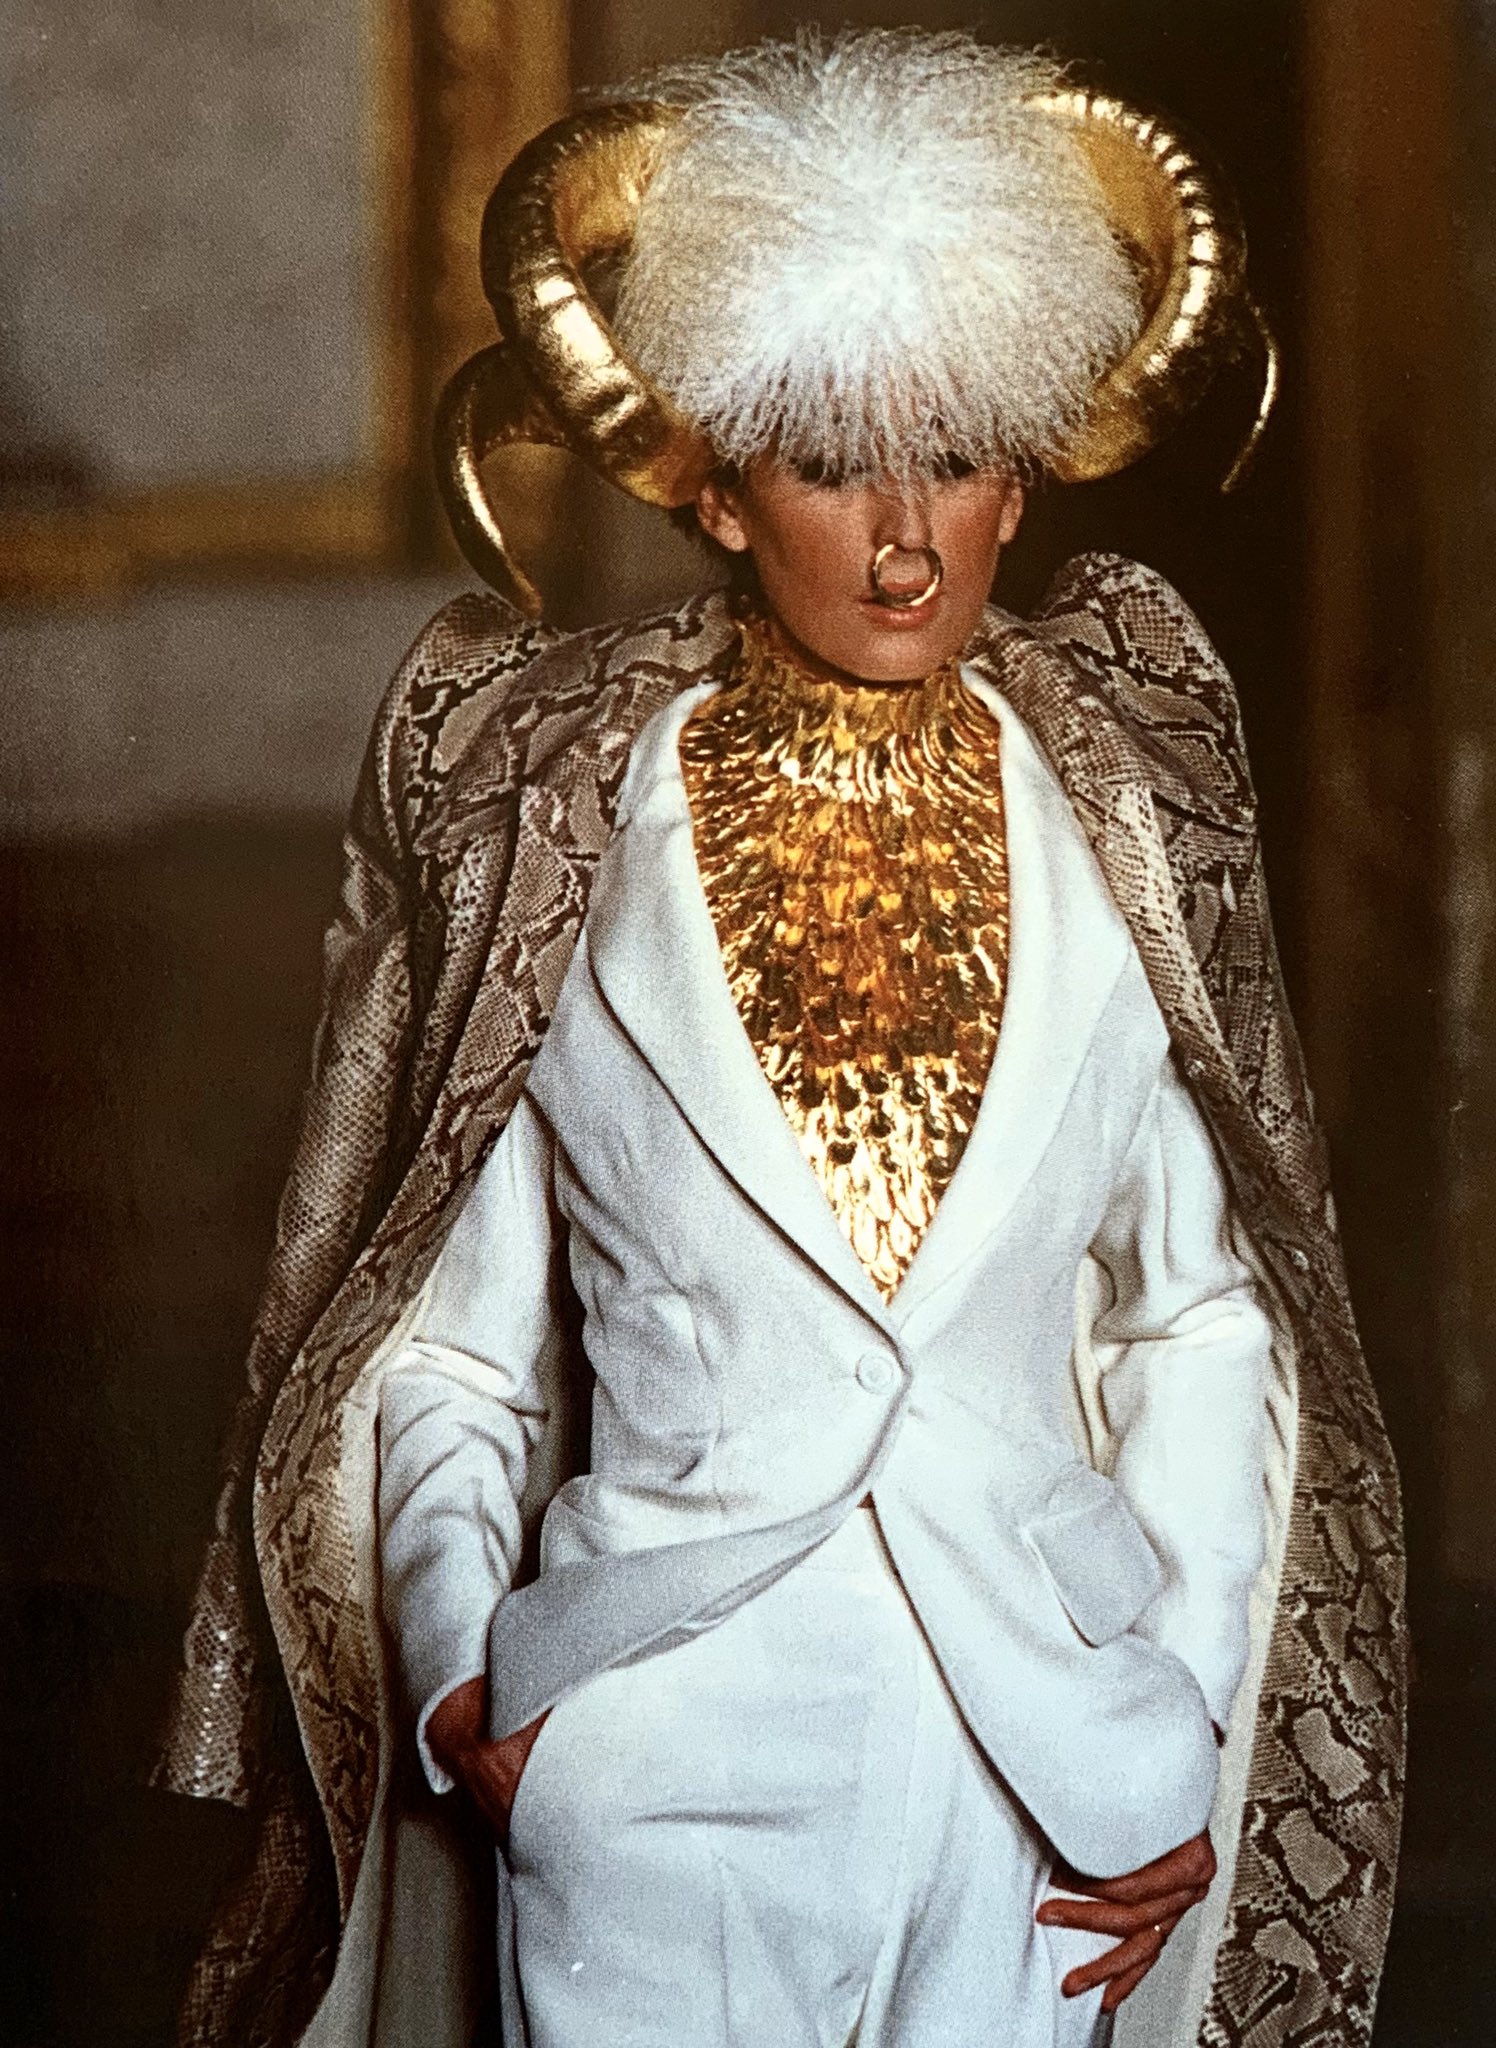 archivealive on X: “Golden Fleece” Spring/Summer 1997, Alexander McQueen's  first haute couture collection for Givenchy